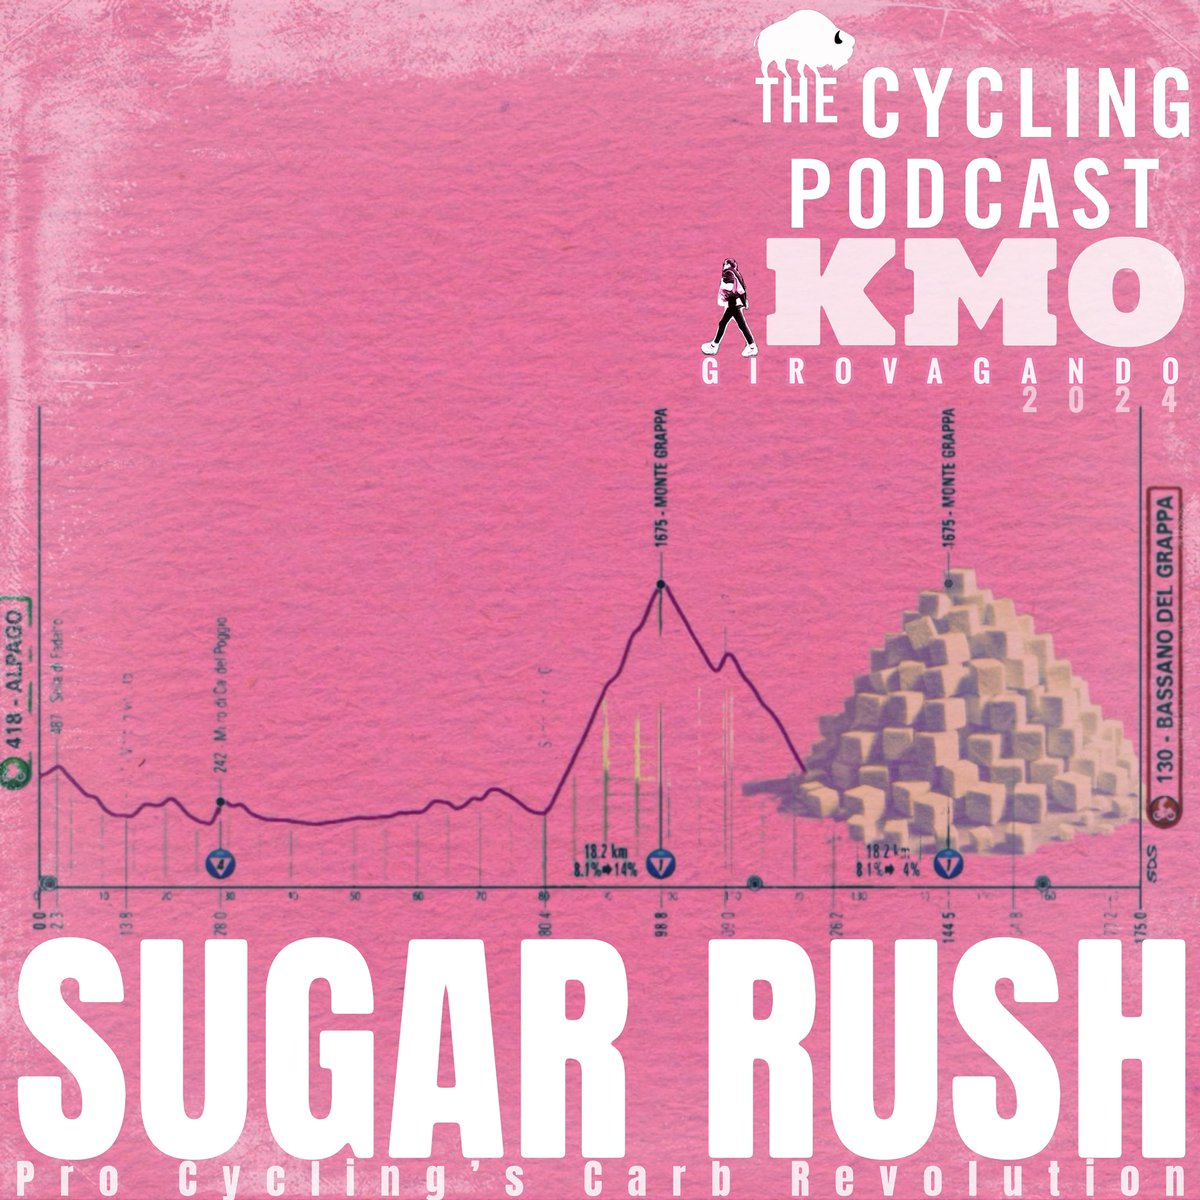 Dropping tomorrow for Friends of The Cycling Podcast: Sugar Rush, Pro Cycling’s Carb Revolution